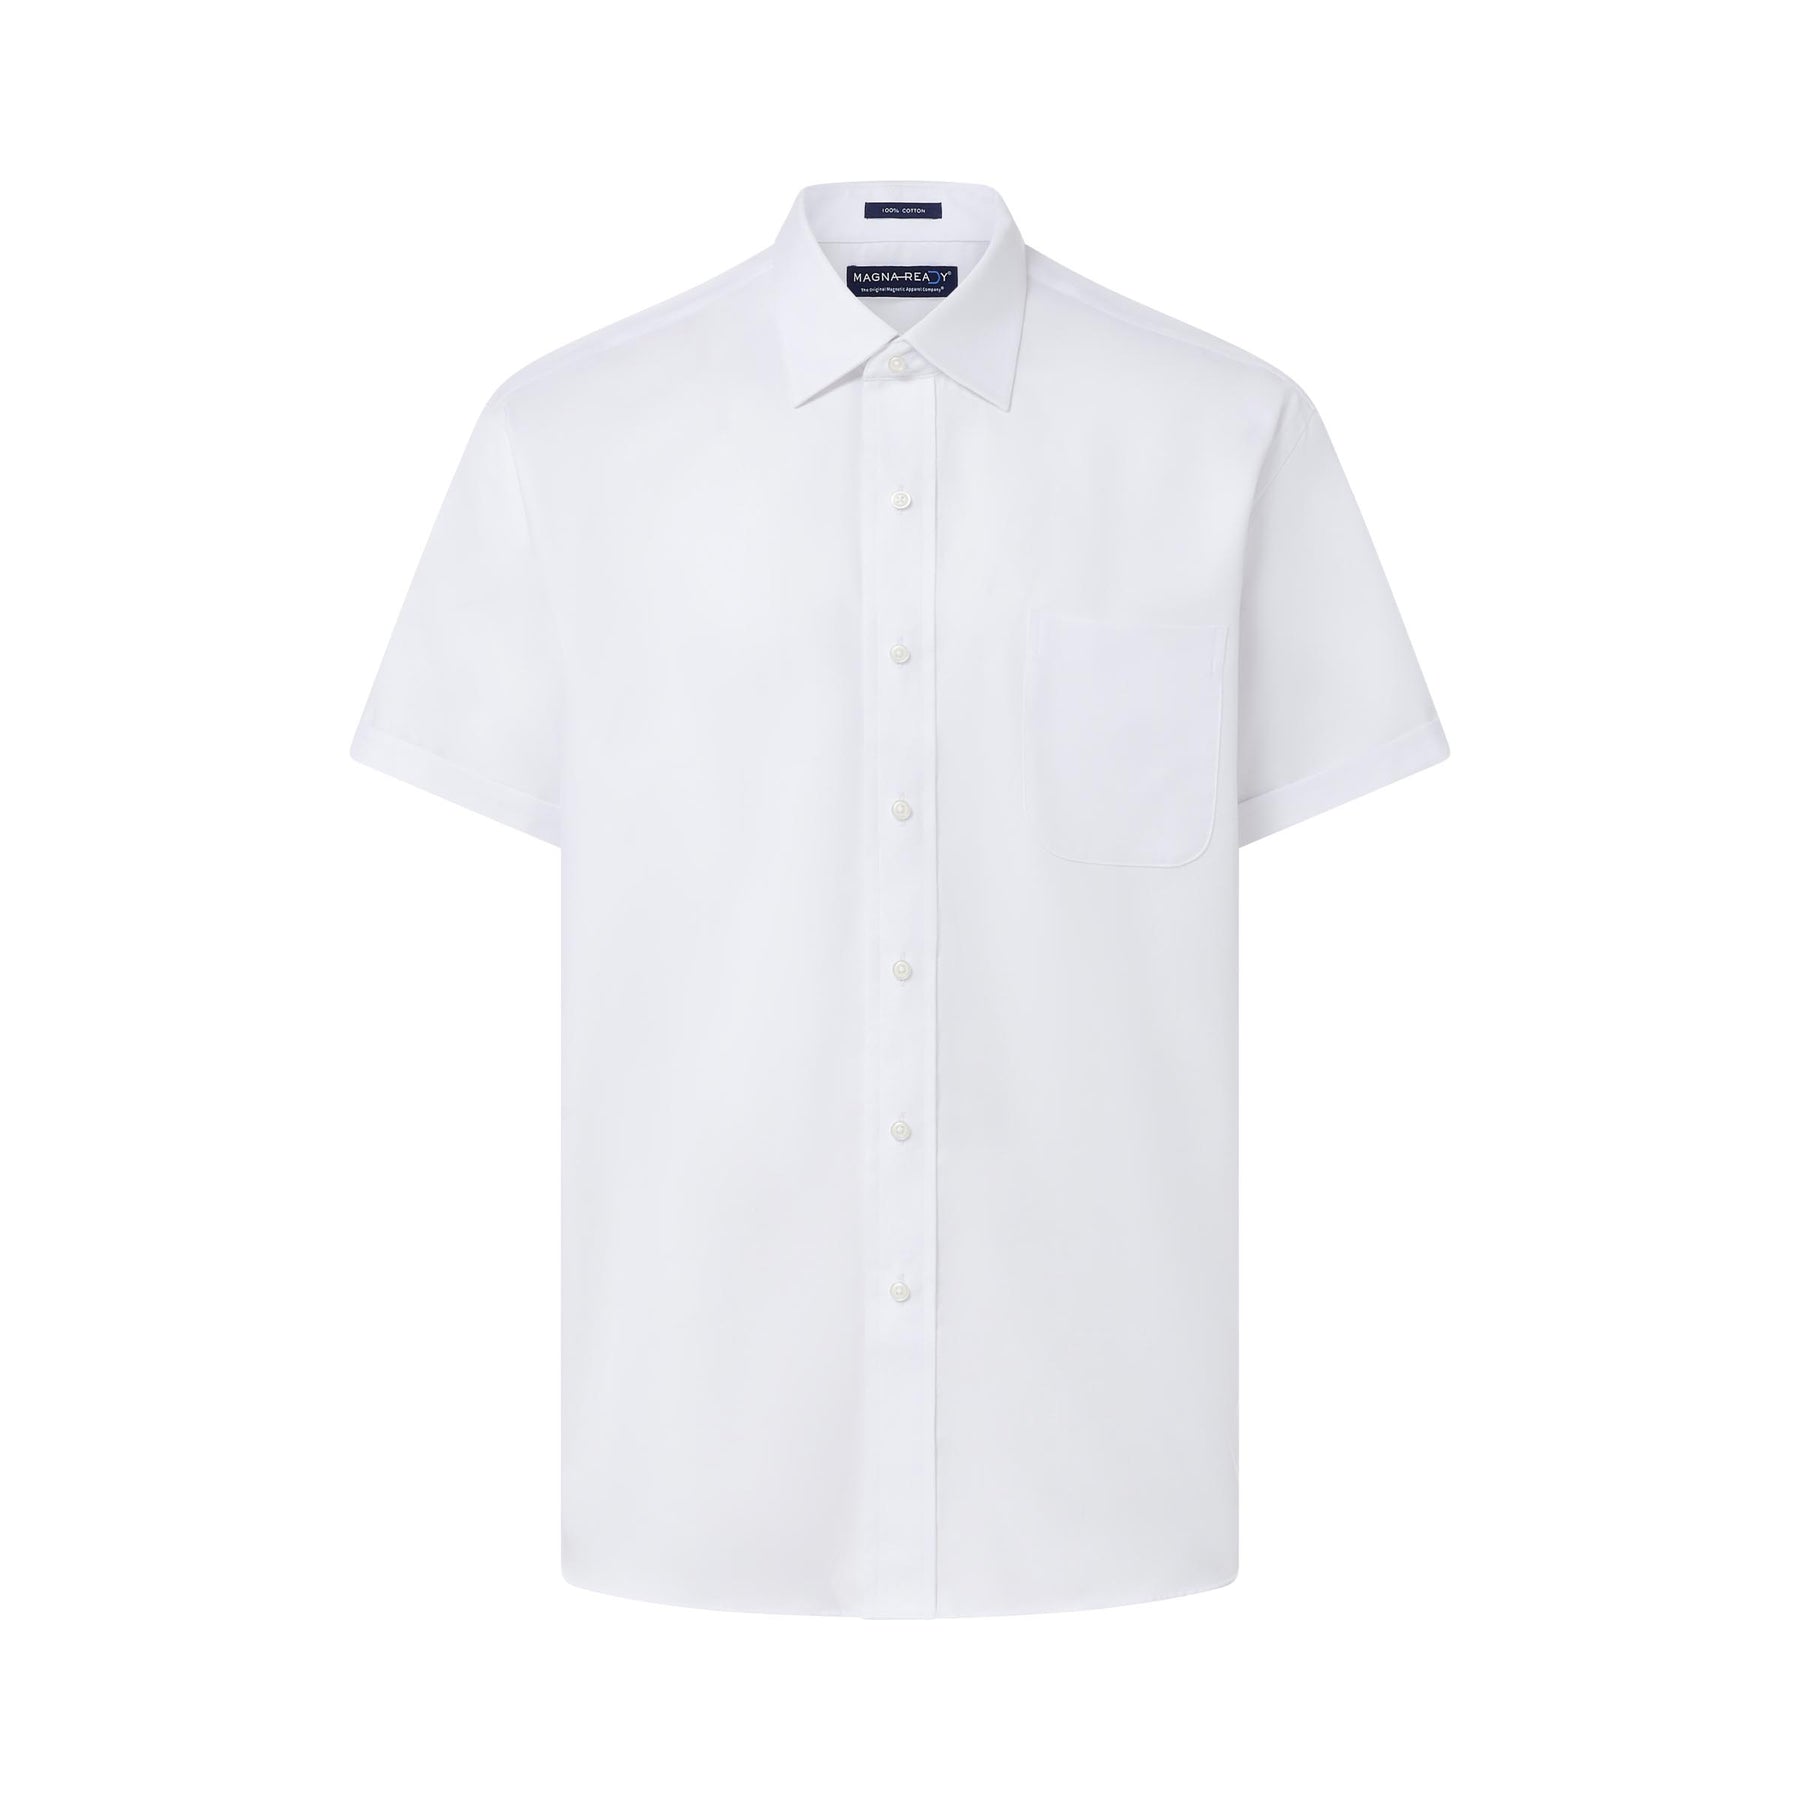 Short Sleeve Solid White ‘Ryan’ Spread Collar 80's 2ply Cotton Shirt with Magnetic Closures